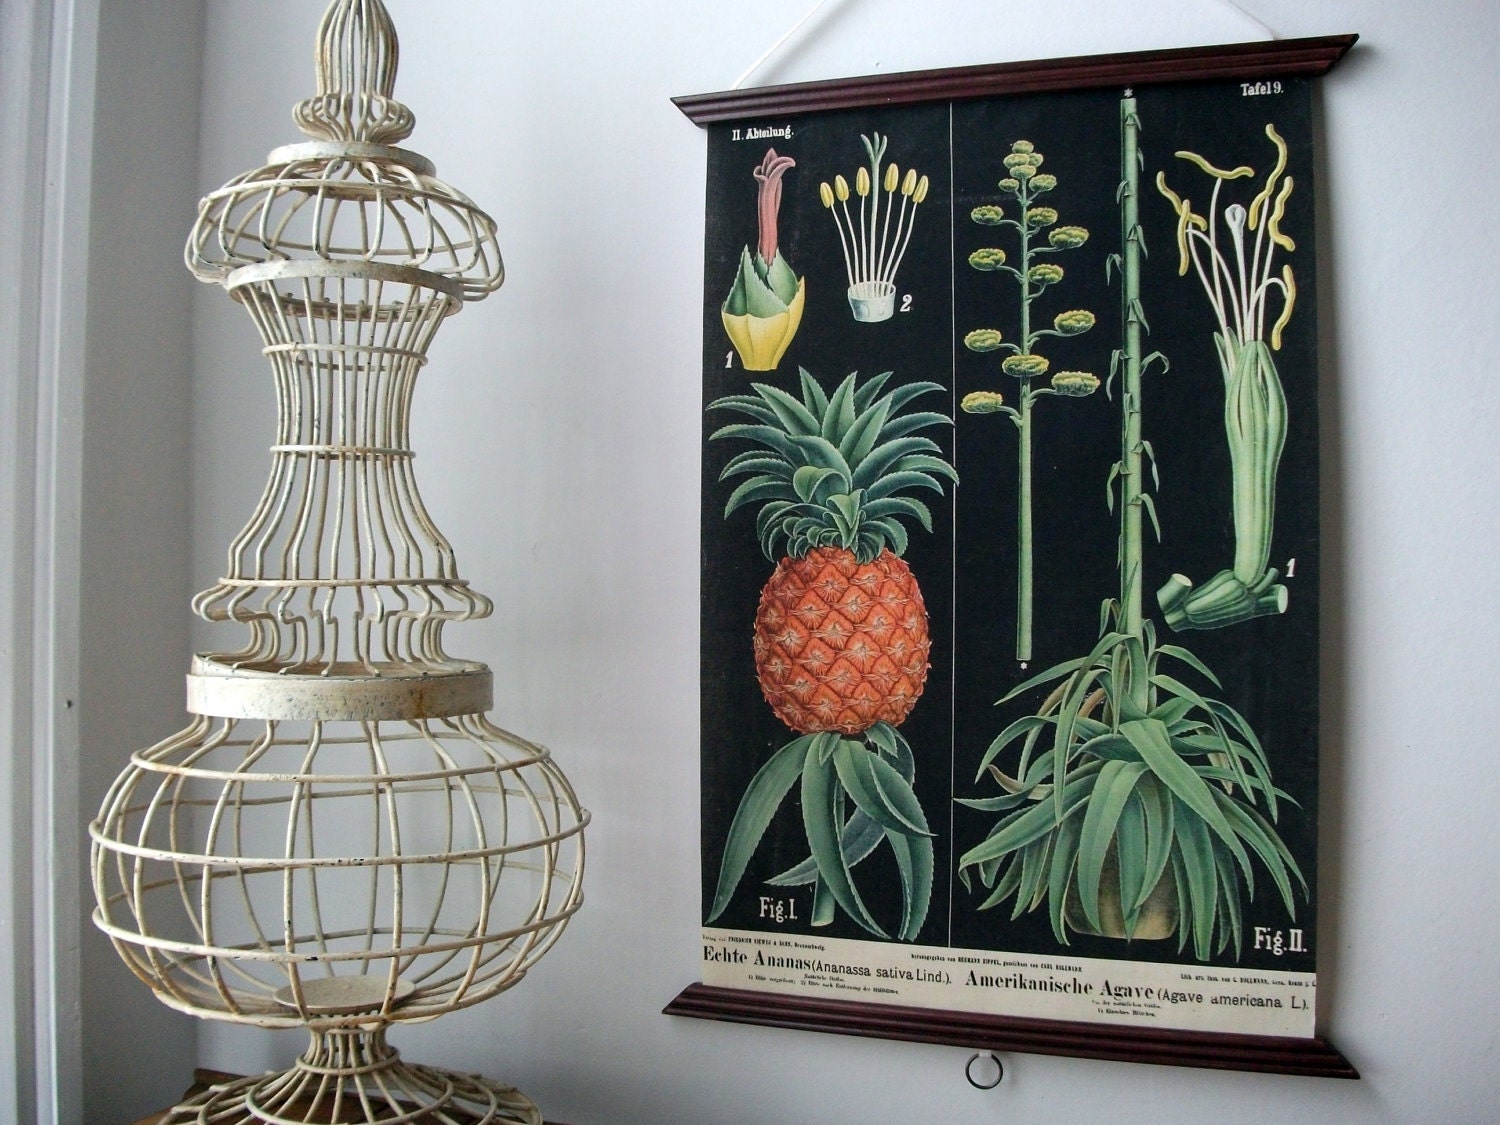 Vintage Pull Down Educational Chart Style Wall Hanging Print on Fabric with Stained Wood Trim  - Botanical Black Pineapple